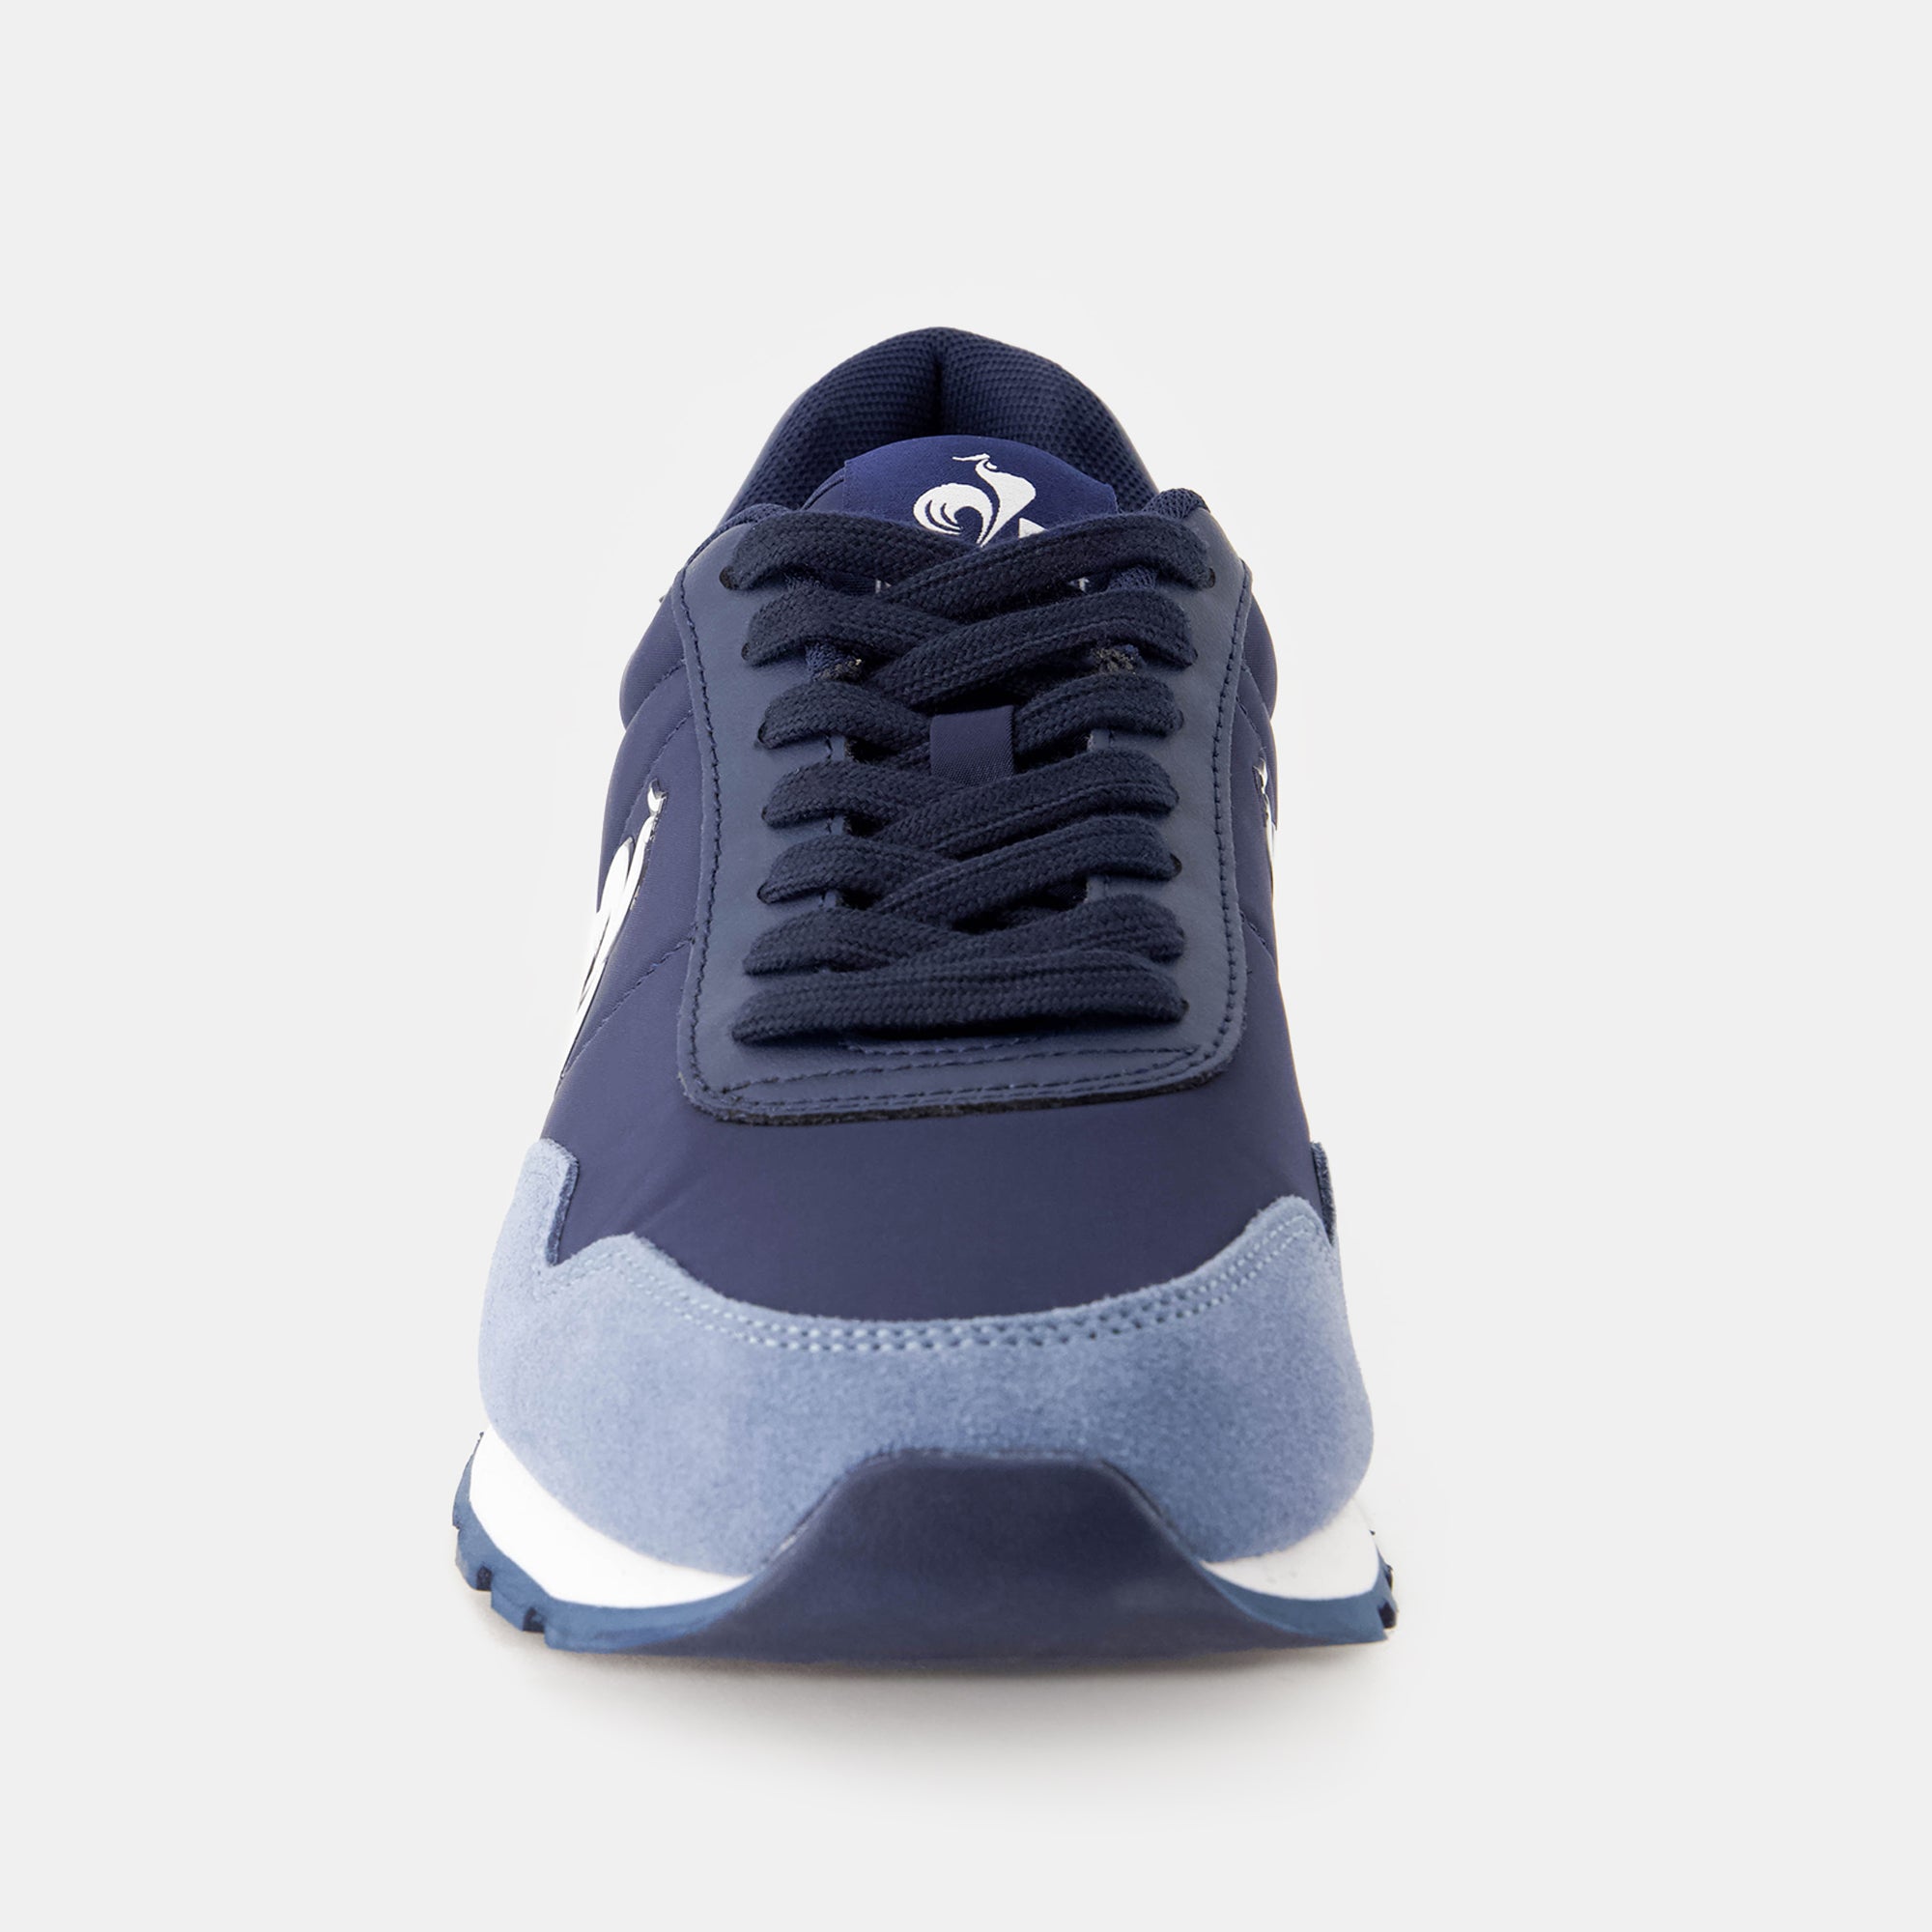 2410503-ASTRA_2 dress blue/ ashley blue | Chaussures ASTRA 2 Unisexe